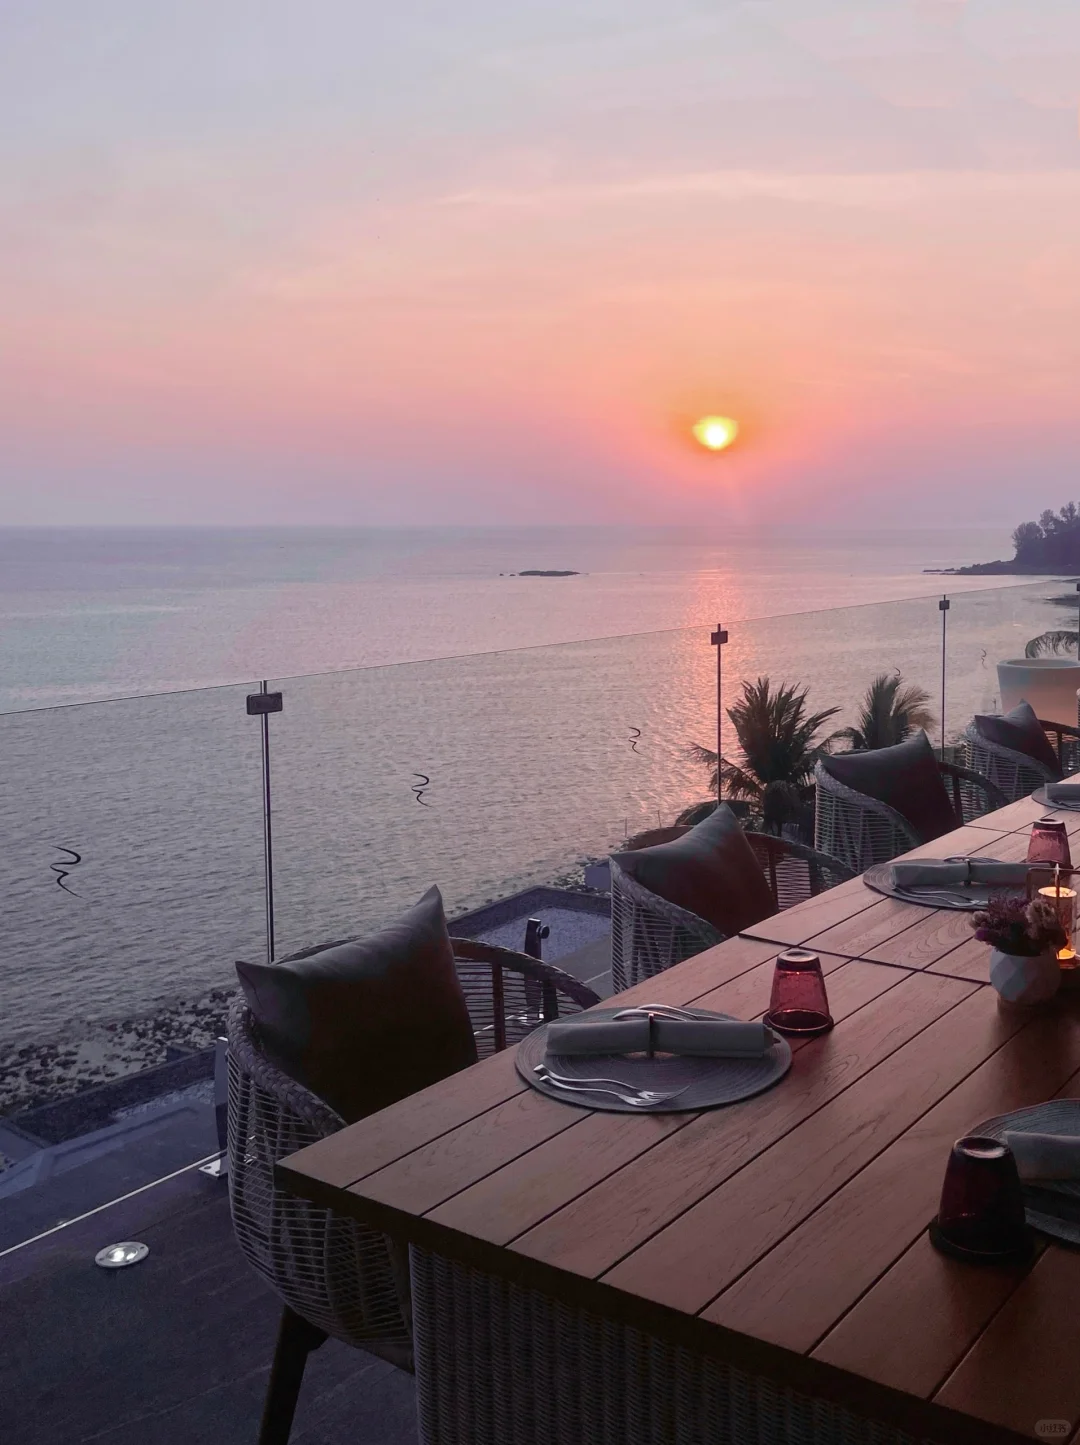 Phuket-Plum Prime Steakhouse, a clifftop restaurant in Phuket, where you can enjoy dinner with the sunset and sea breeze